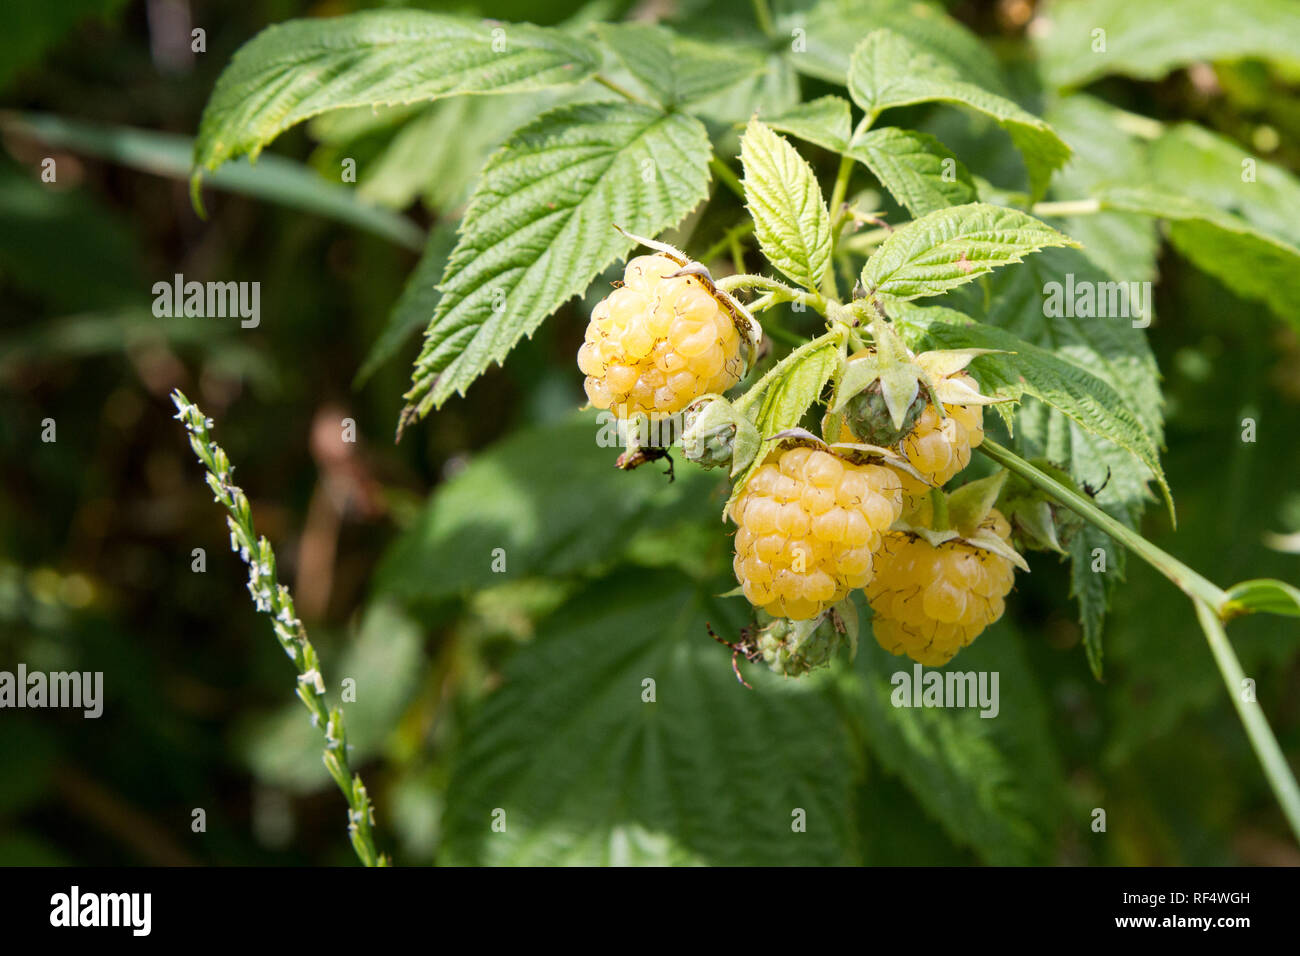 Ripe yellow raspberries on a bush. The raspberry is the edible fruit of a multitude of plant species in the genus Rubus of the rose family. Stock Photo